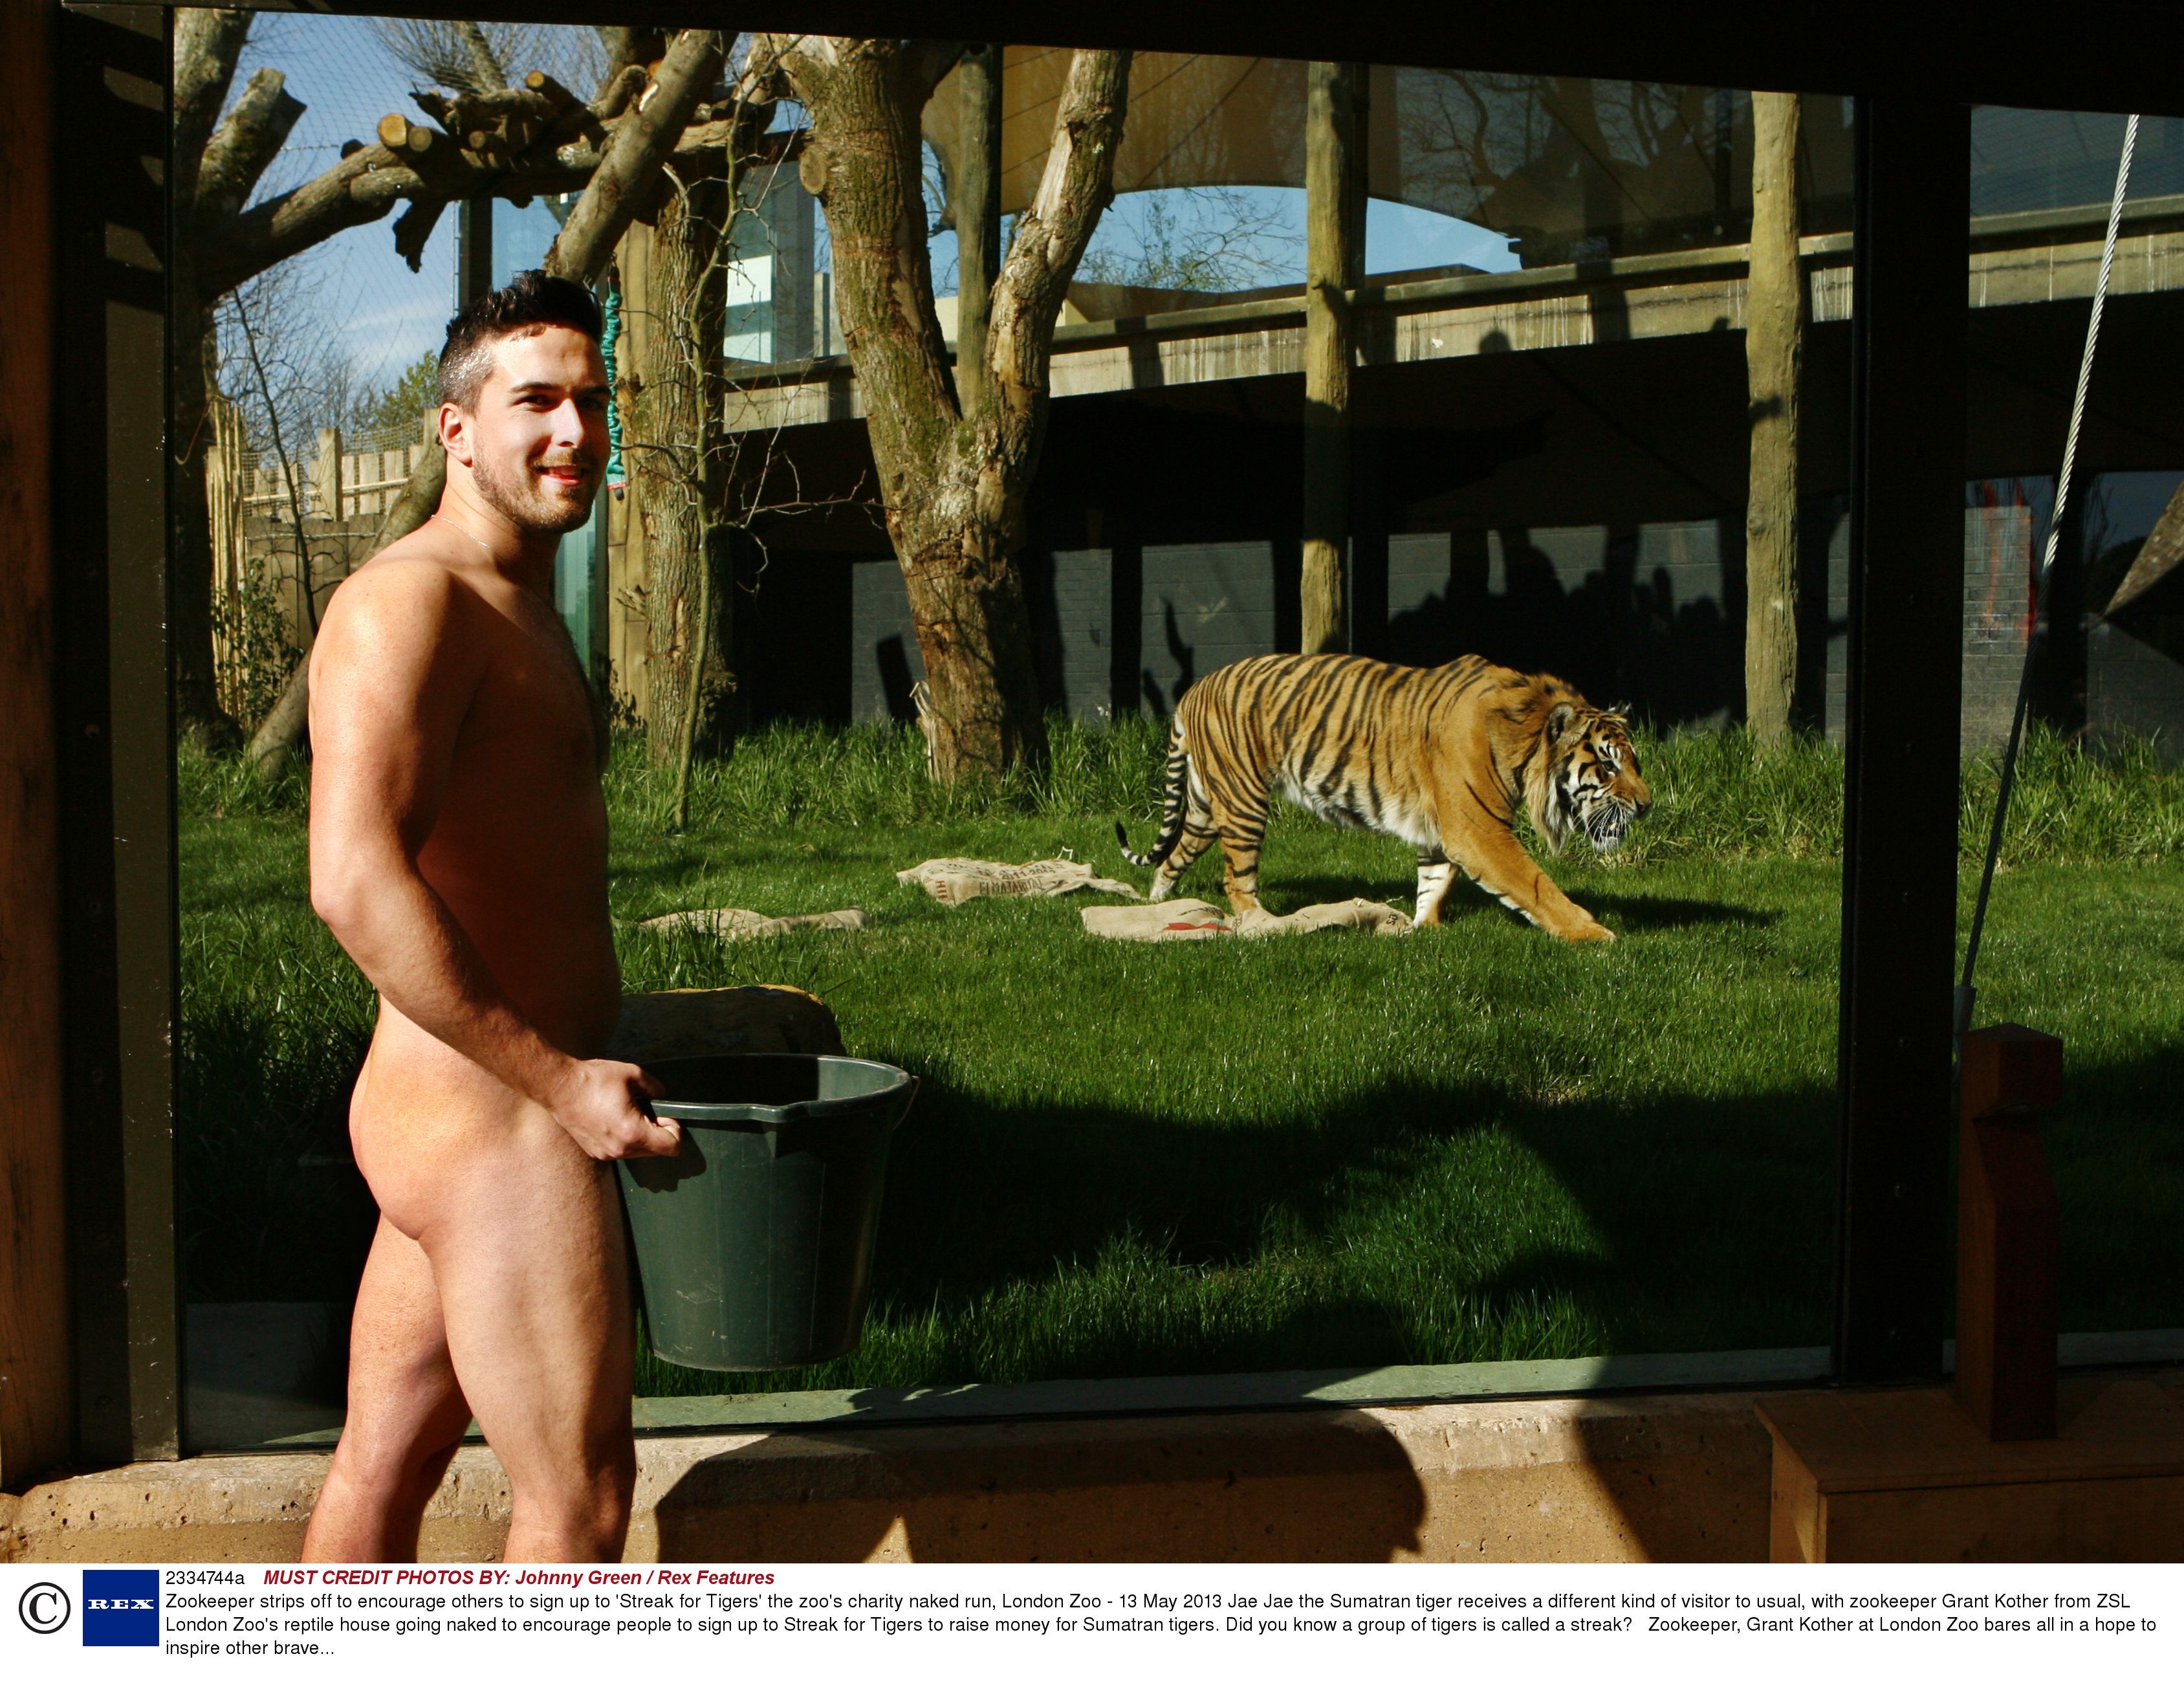 Gay Spy Zookeeper goes naked for charity pic